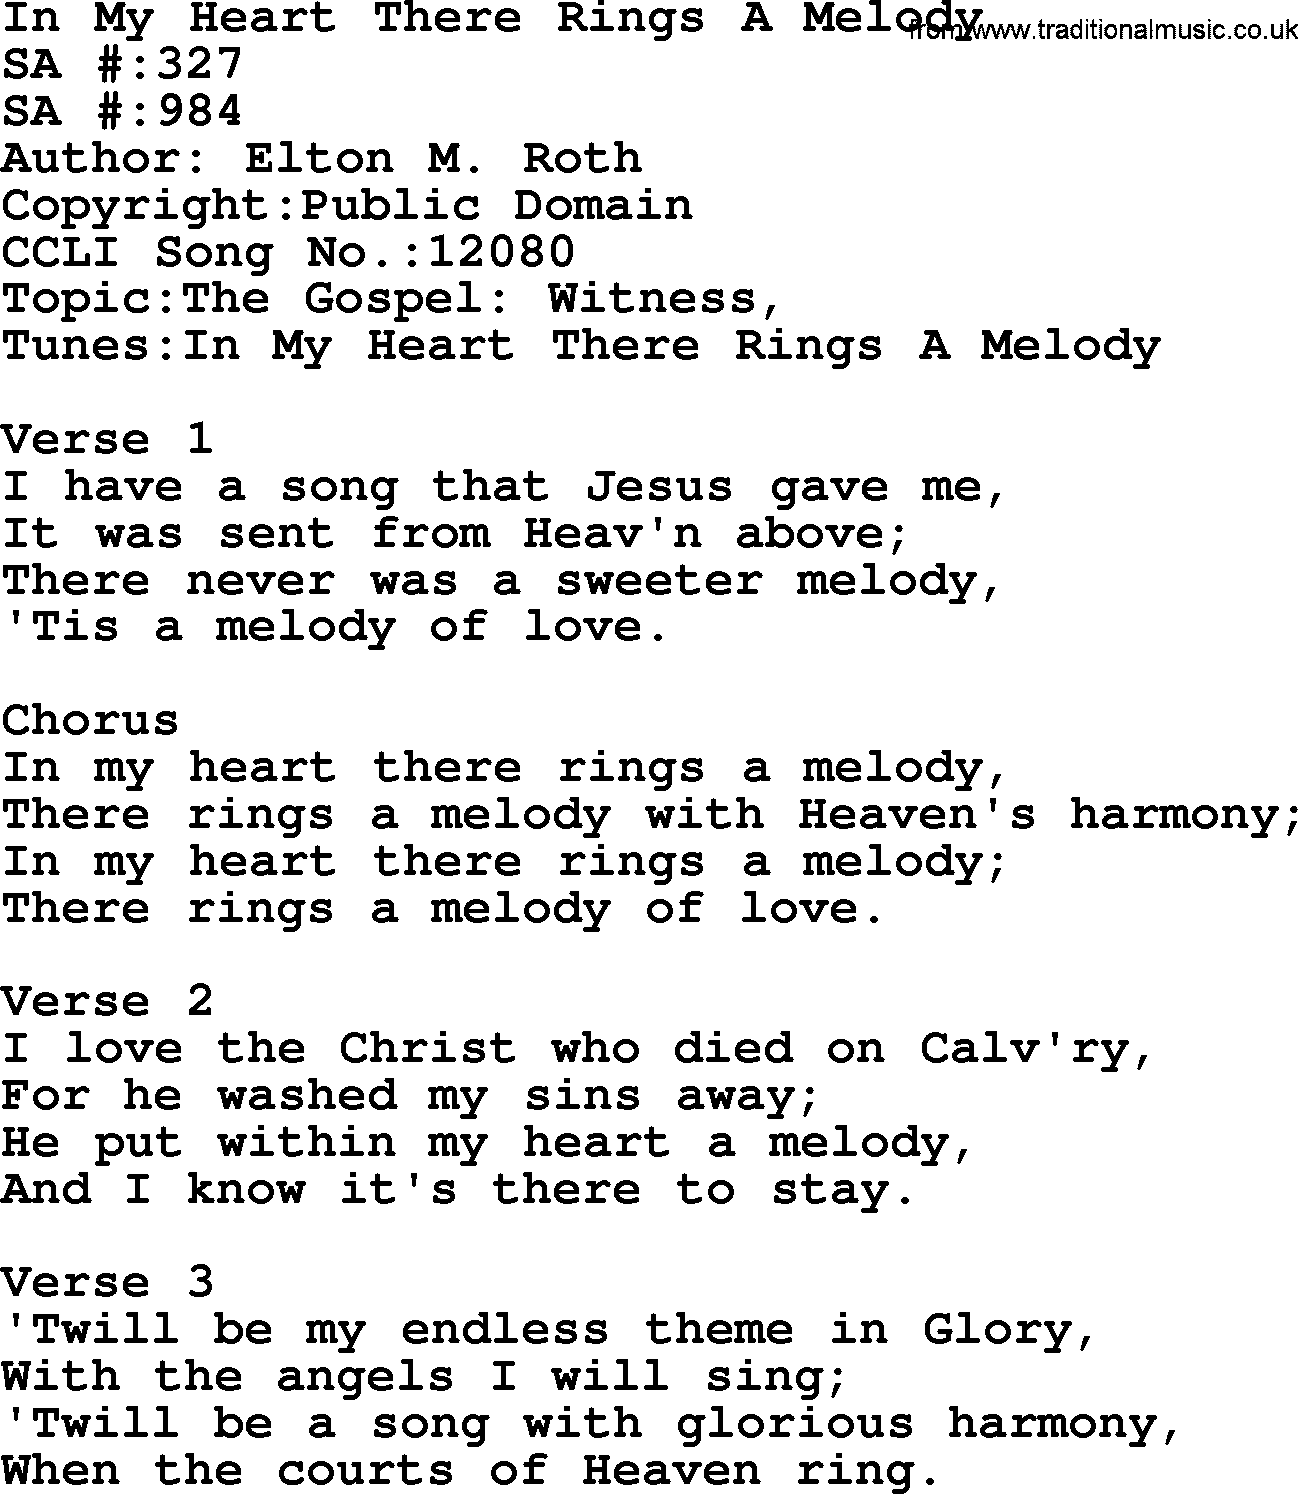 Salvation Army Hymnal, title: In My Heart There Rings A Melody, with lyrics and PDF,